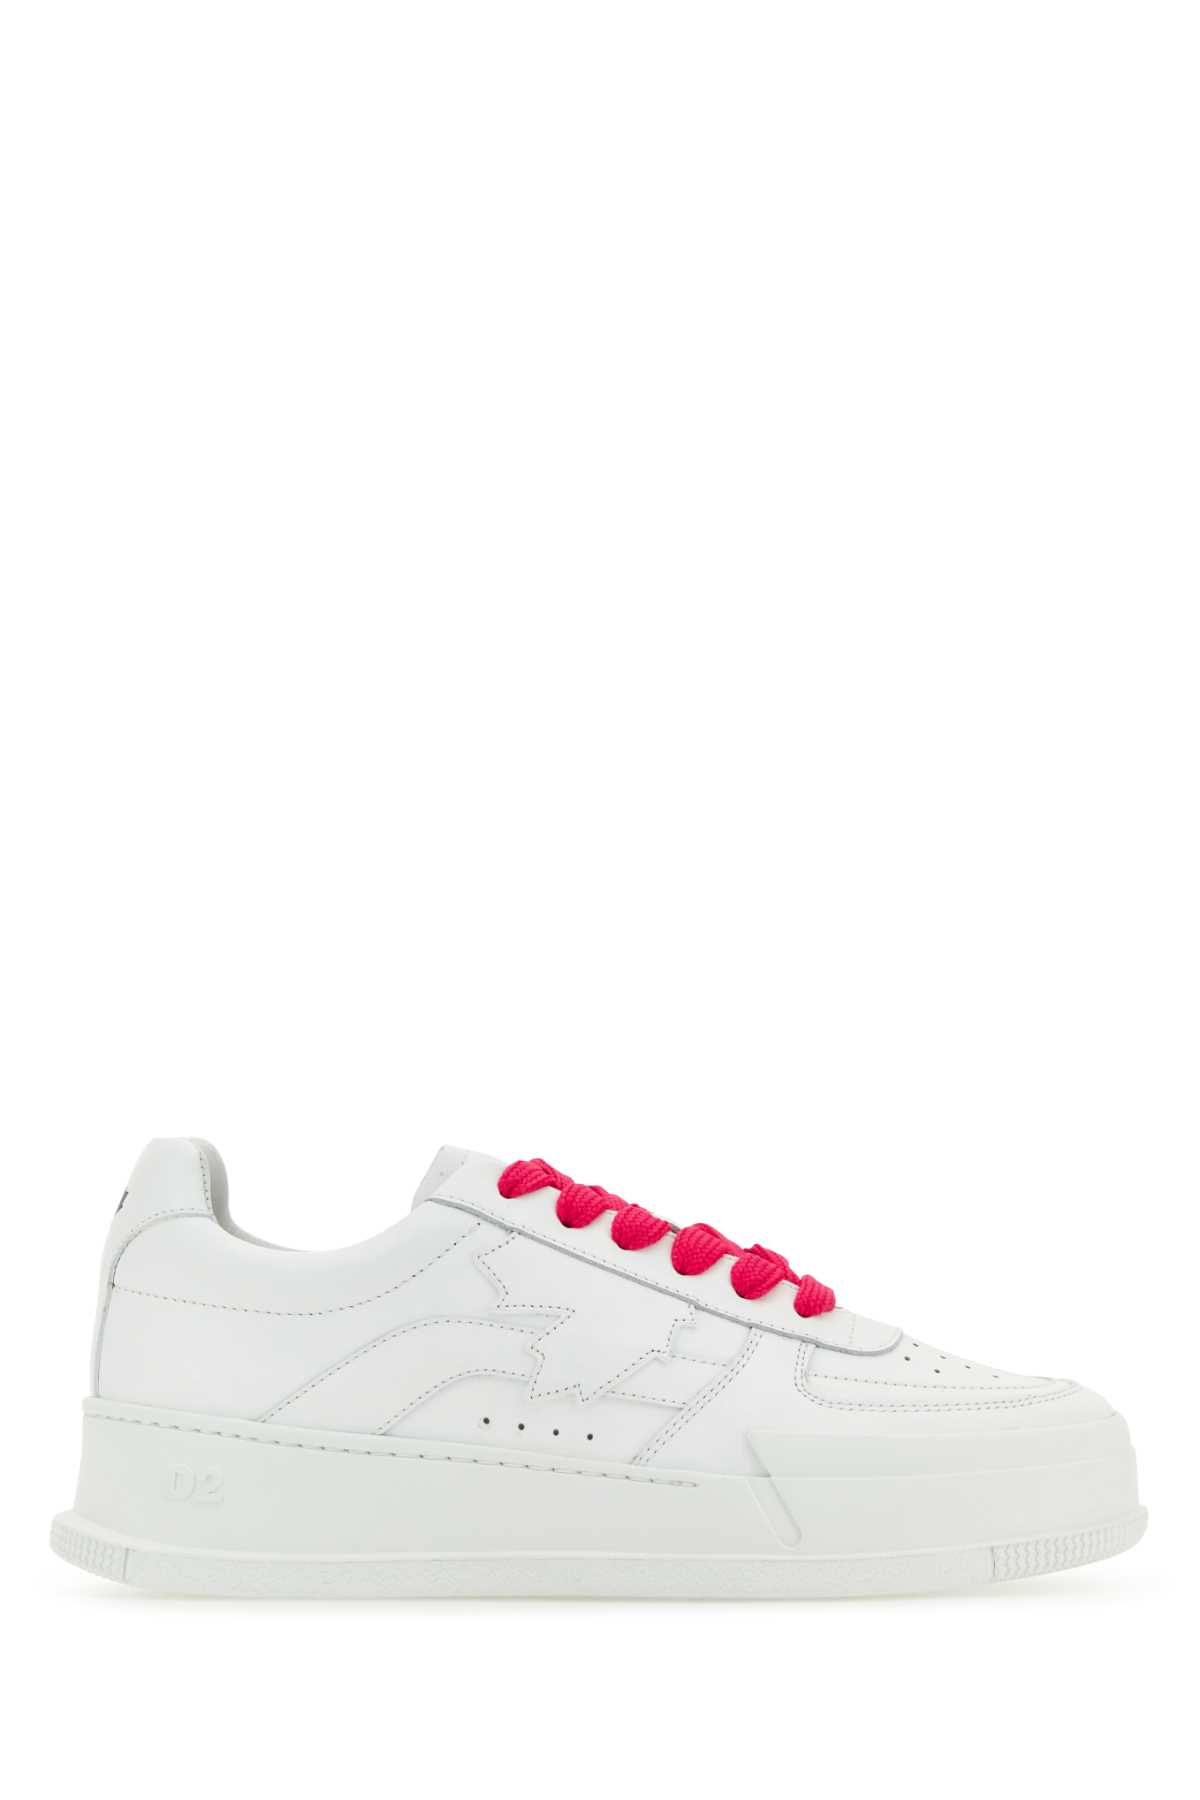 White Leather Canadian Sneakers